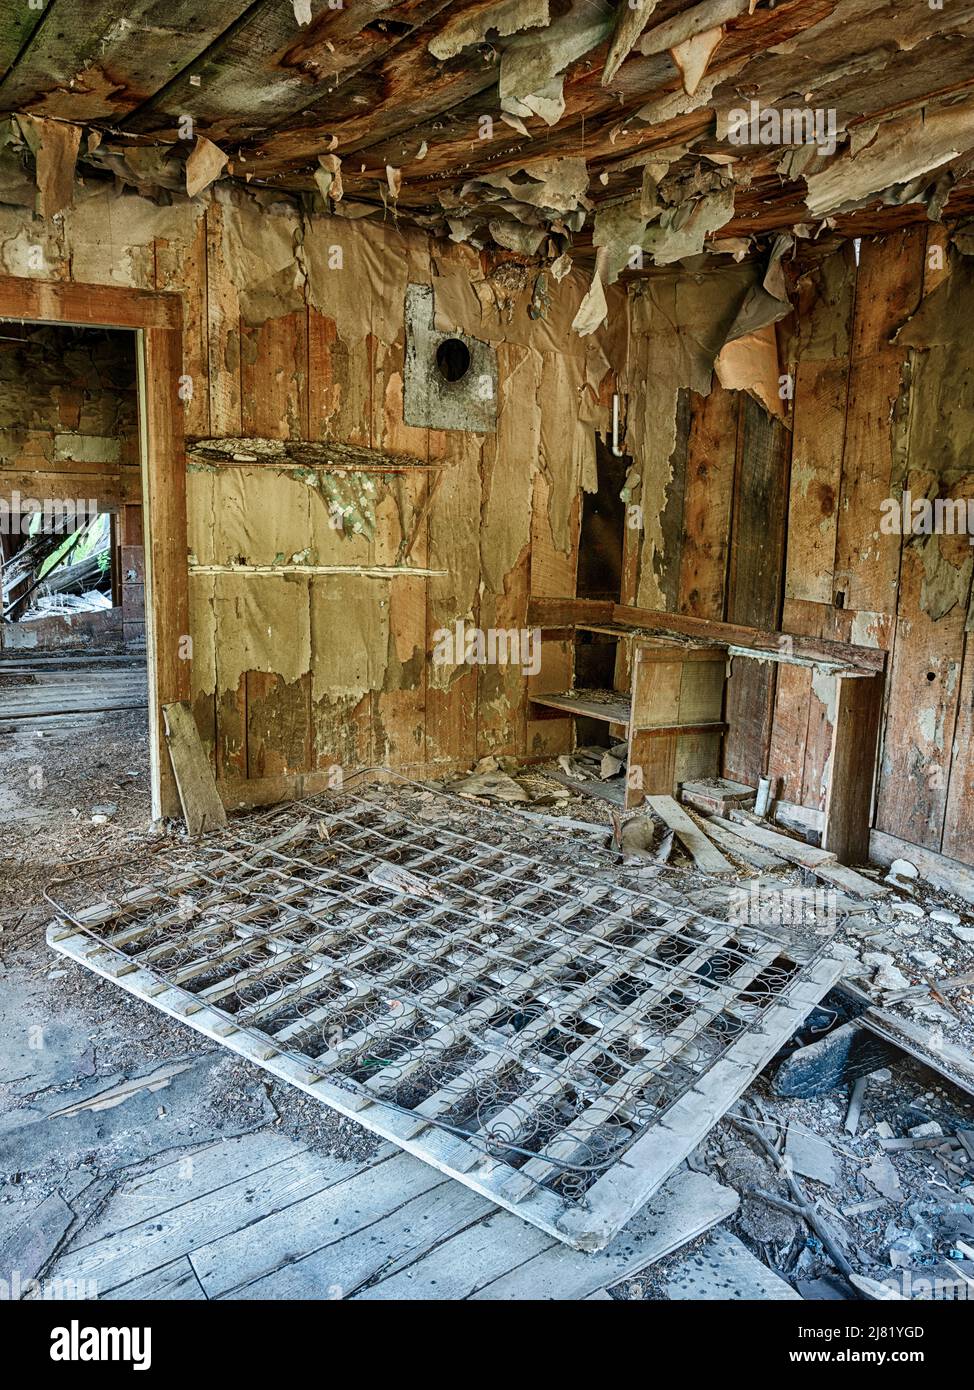 An empty room shows peeling wallpaper and some mattress springs in the ghost town of Bodie, Washington. Stock Photo